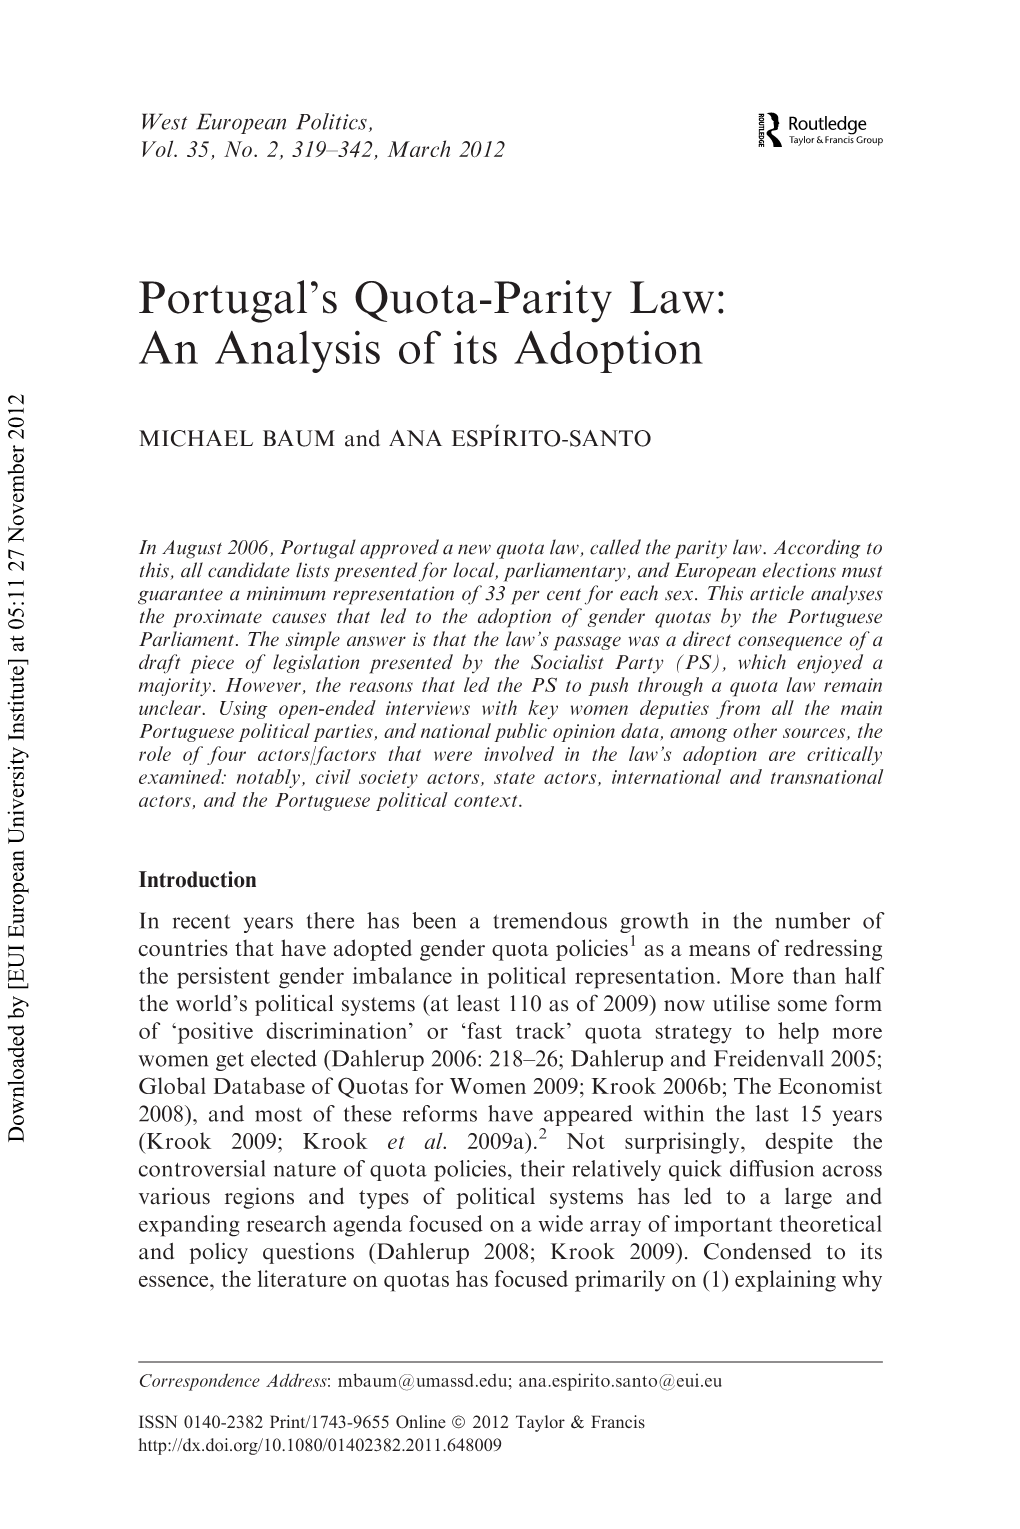 Portugal's Quota-Parity Law: an Analysis of Its Adoption